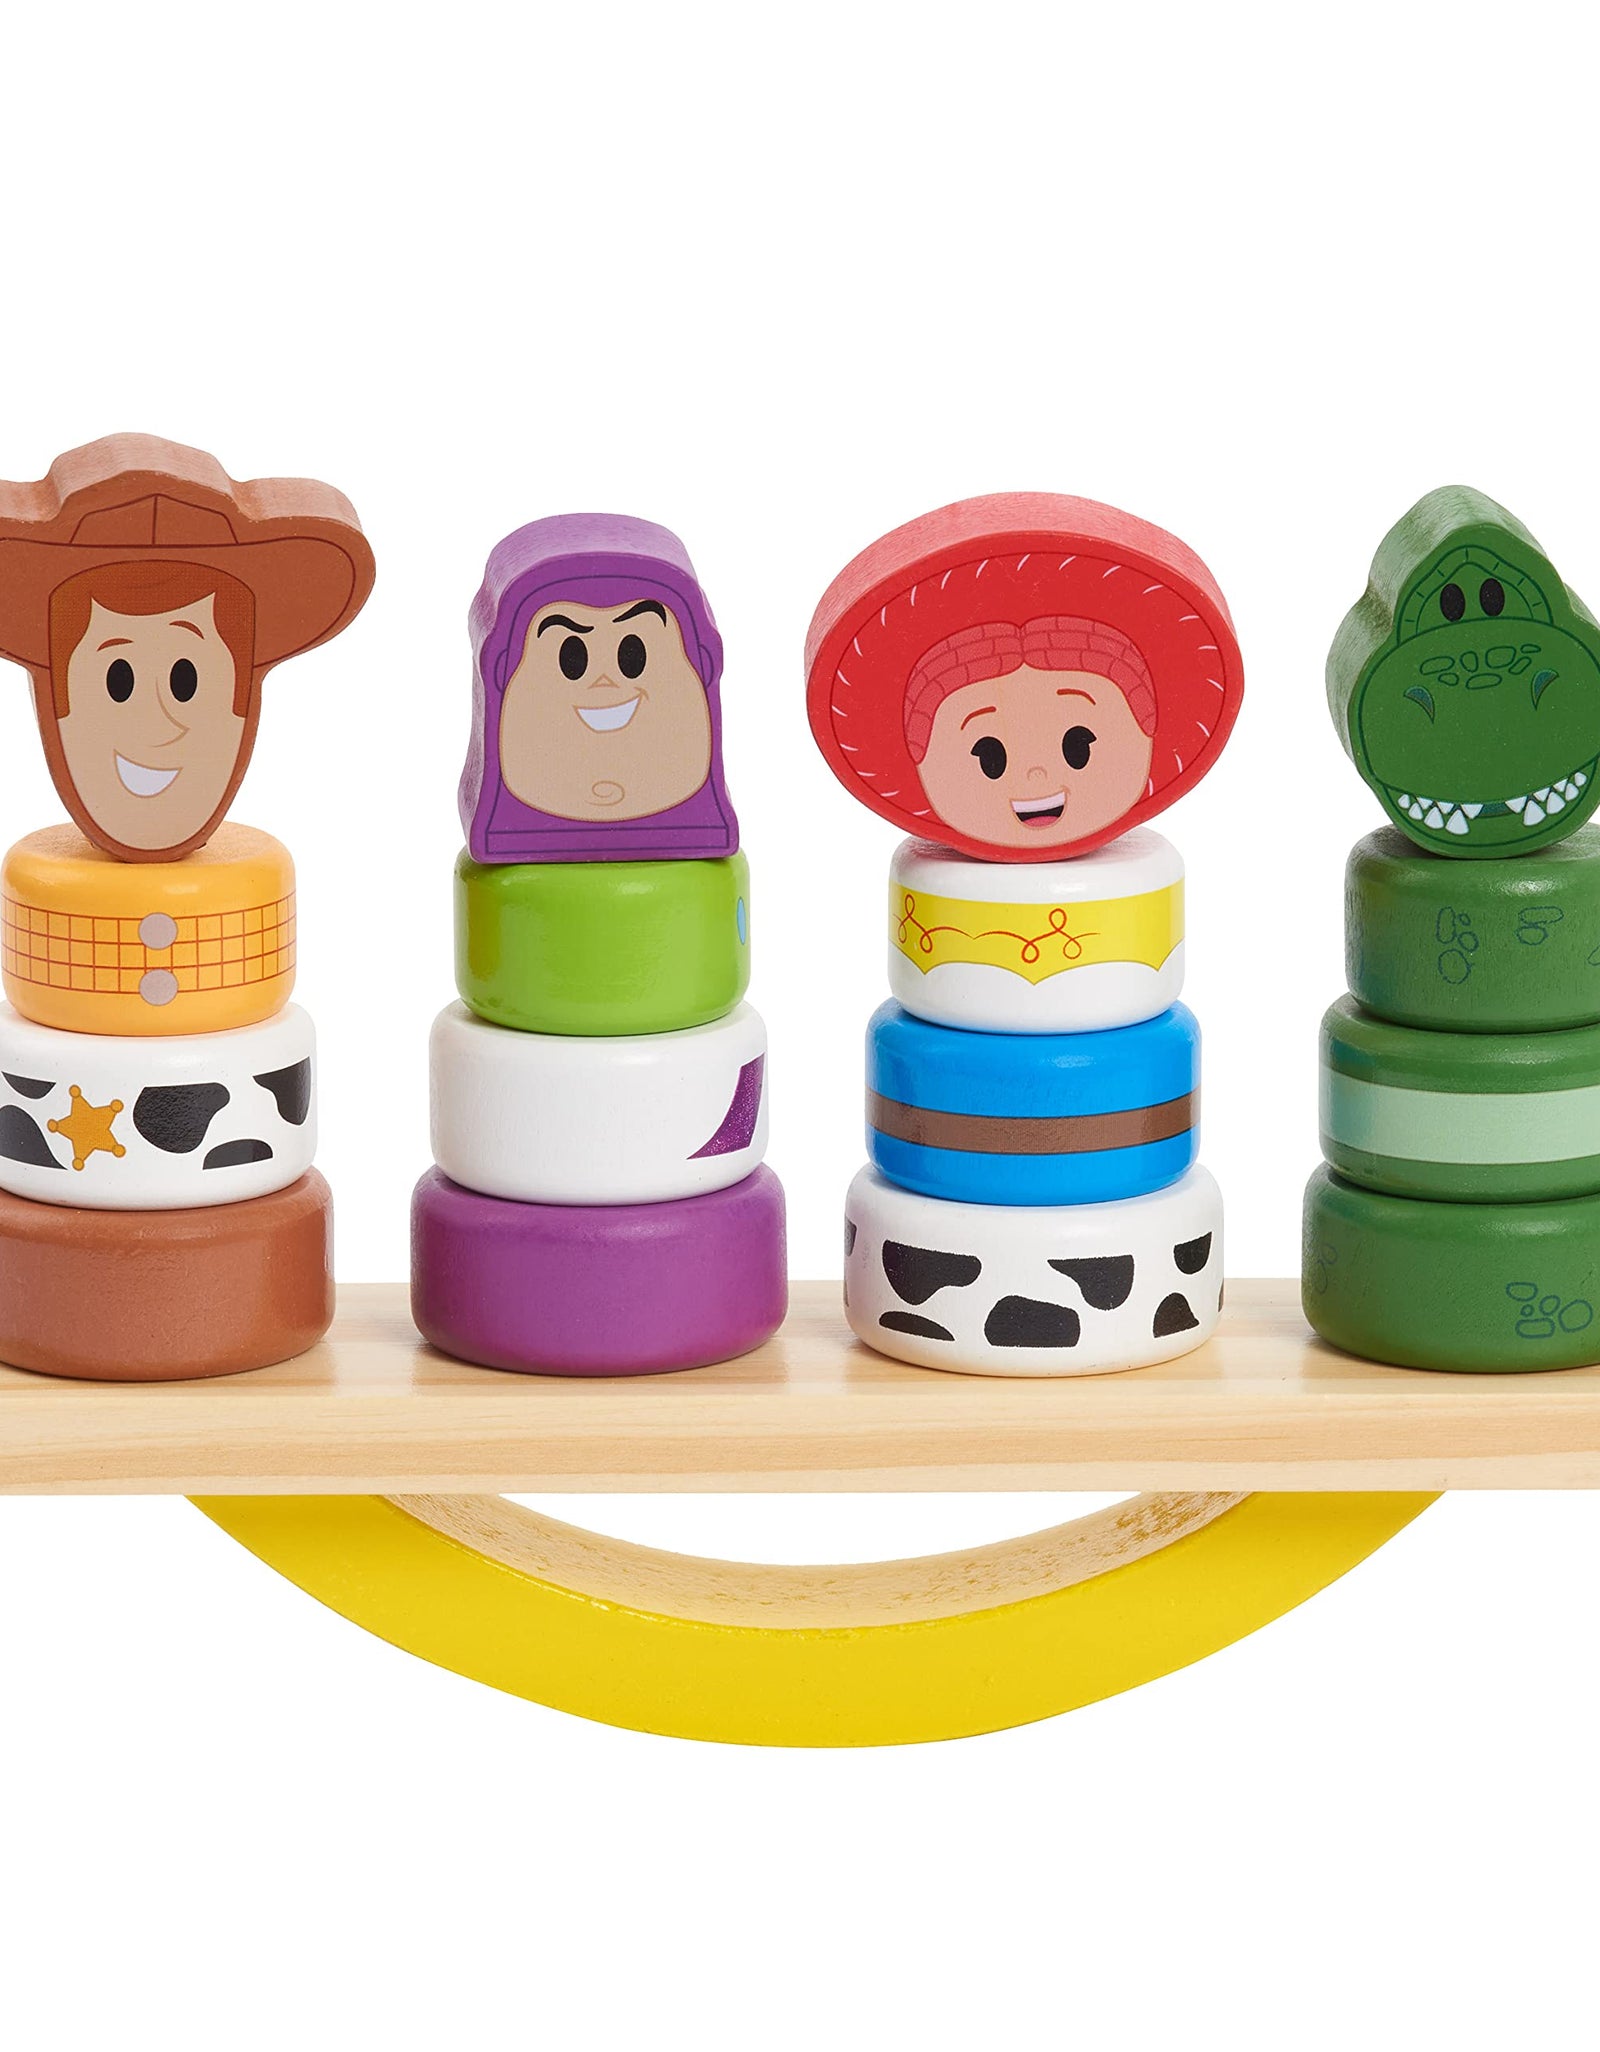 Disney Wooden Toys Toy Story Balance Blocks, 17-Piece Set Features Woody, Buzz Lightyear, Jessie, and Rex, Amazon Exclusive, by Just Play